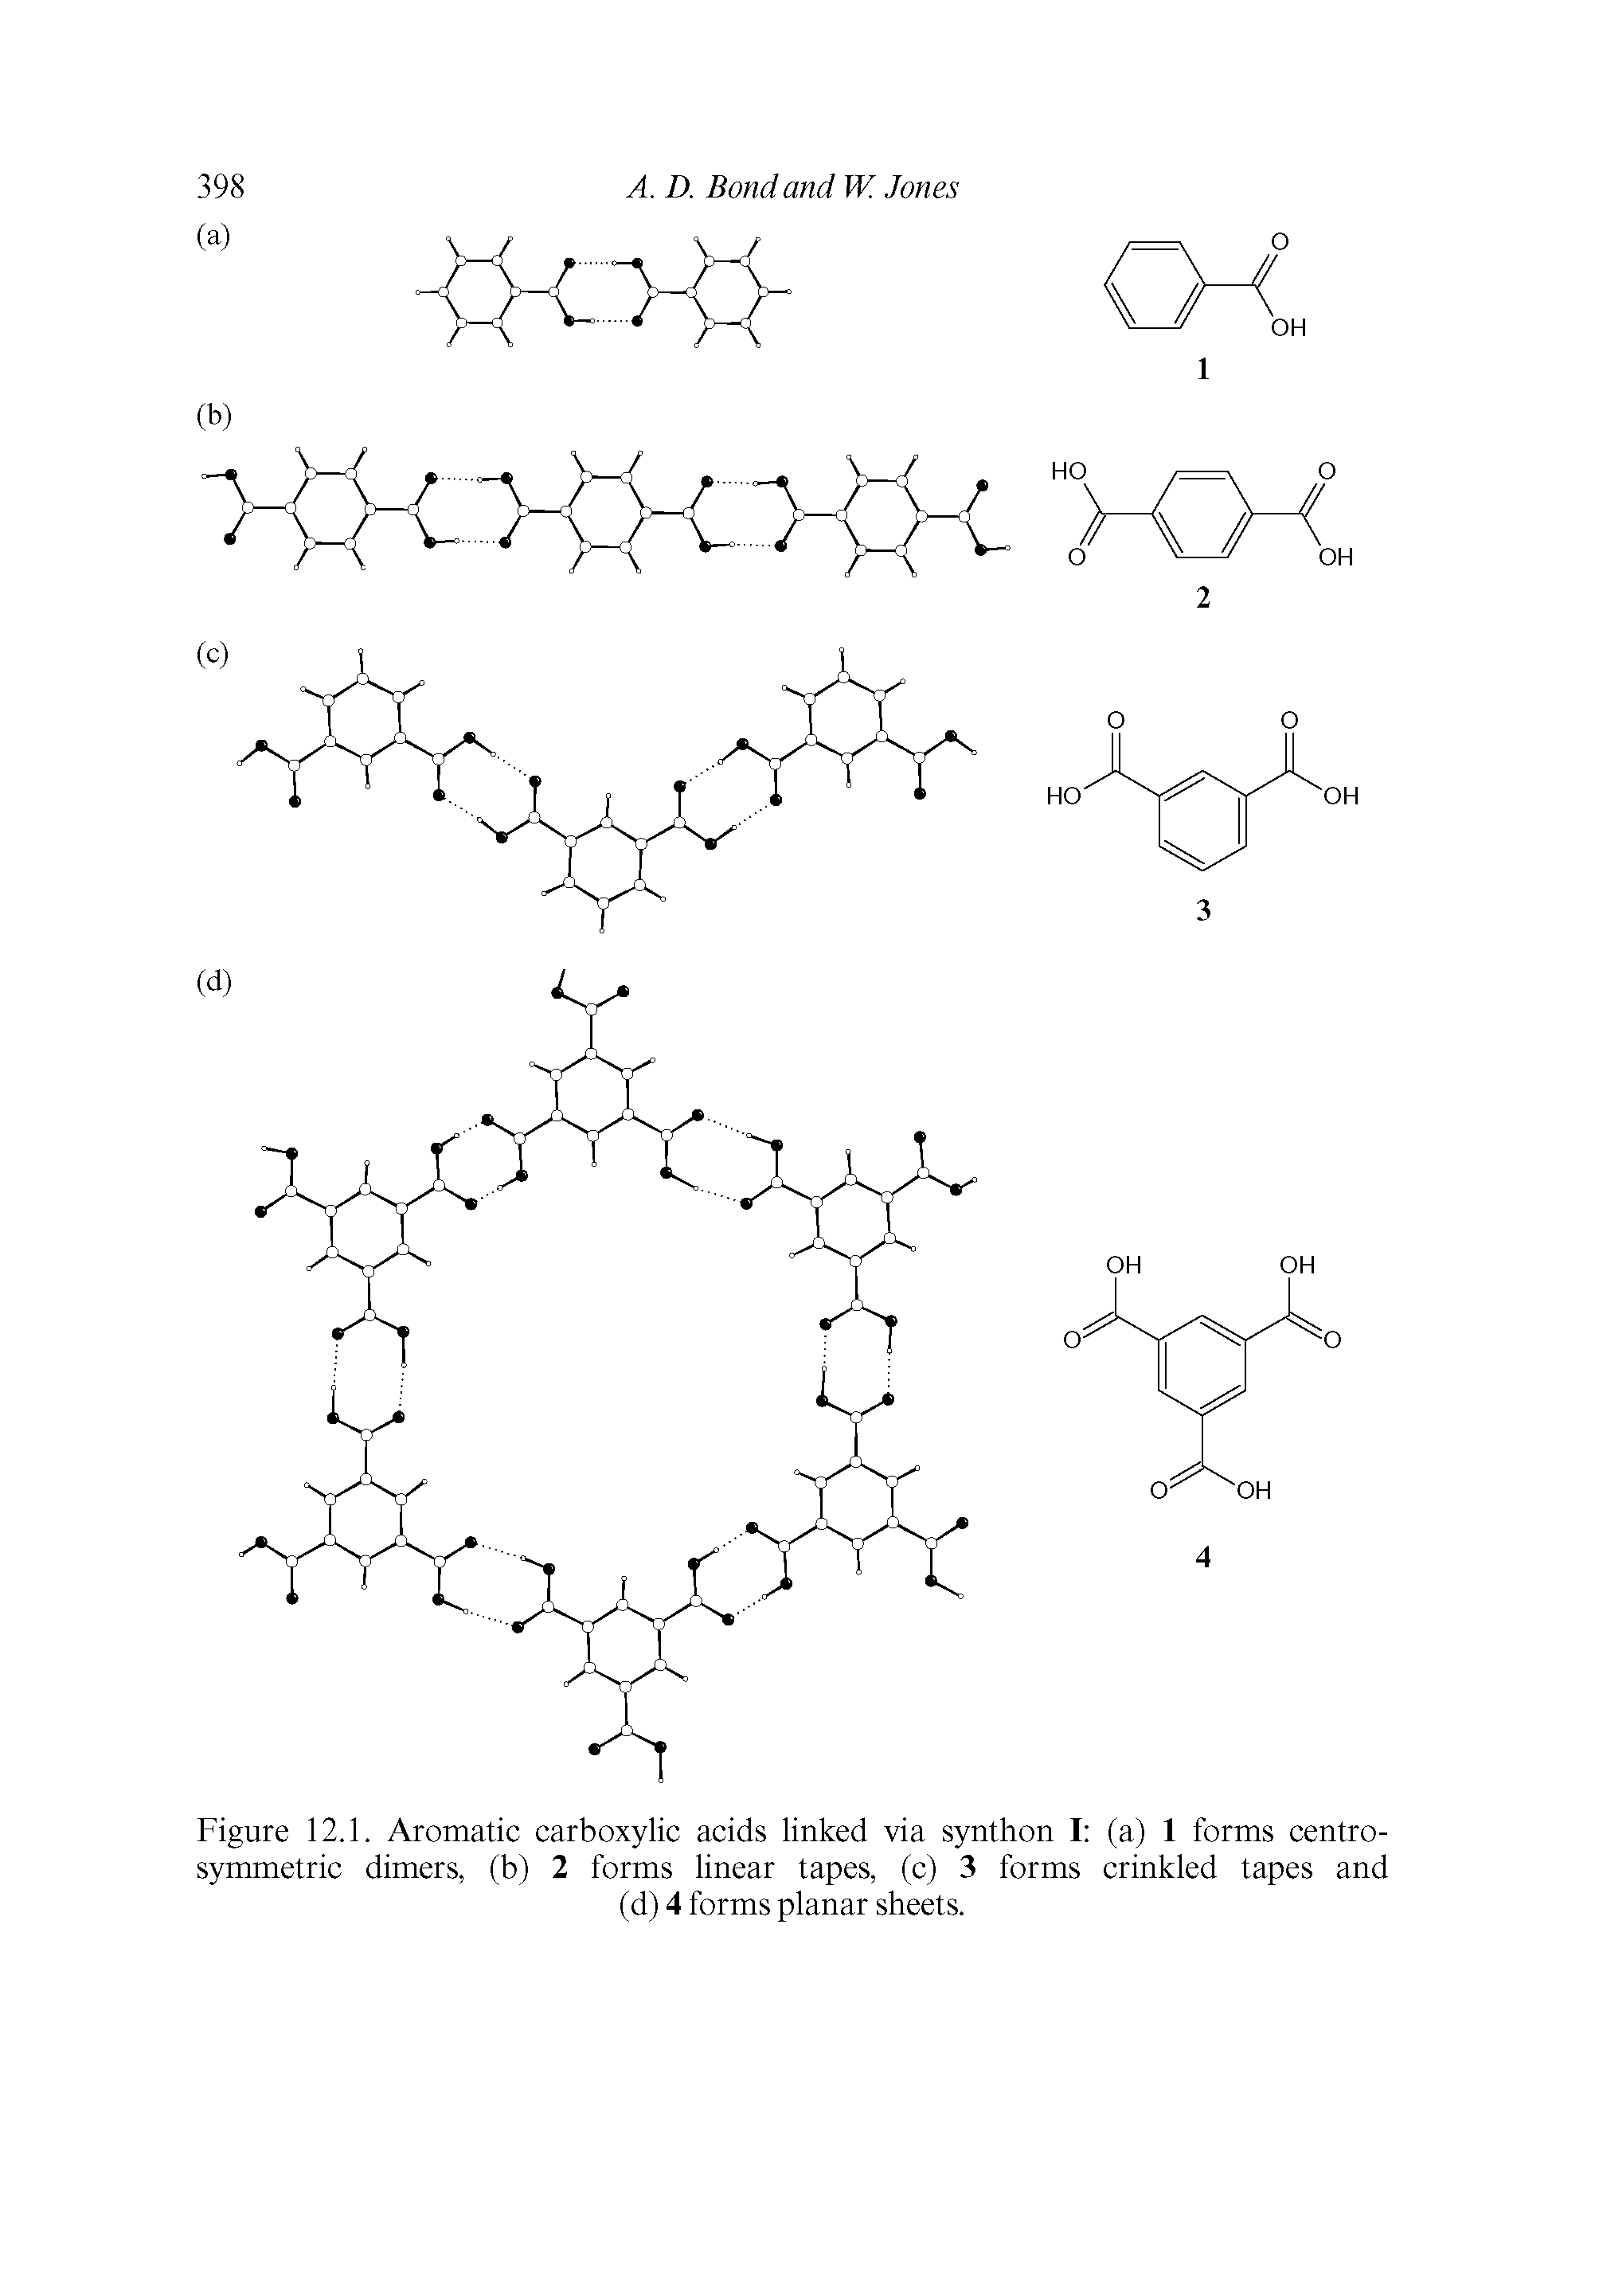 Figure 12.1. Aromatic carboxylic acids linked via synthon I (a) 1 forms centro-symmetric dimers, (b) 2 forms linear tapes, (c) 3 forms crinkled tapes and...